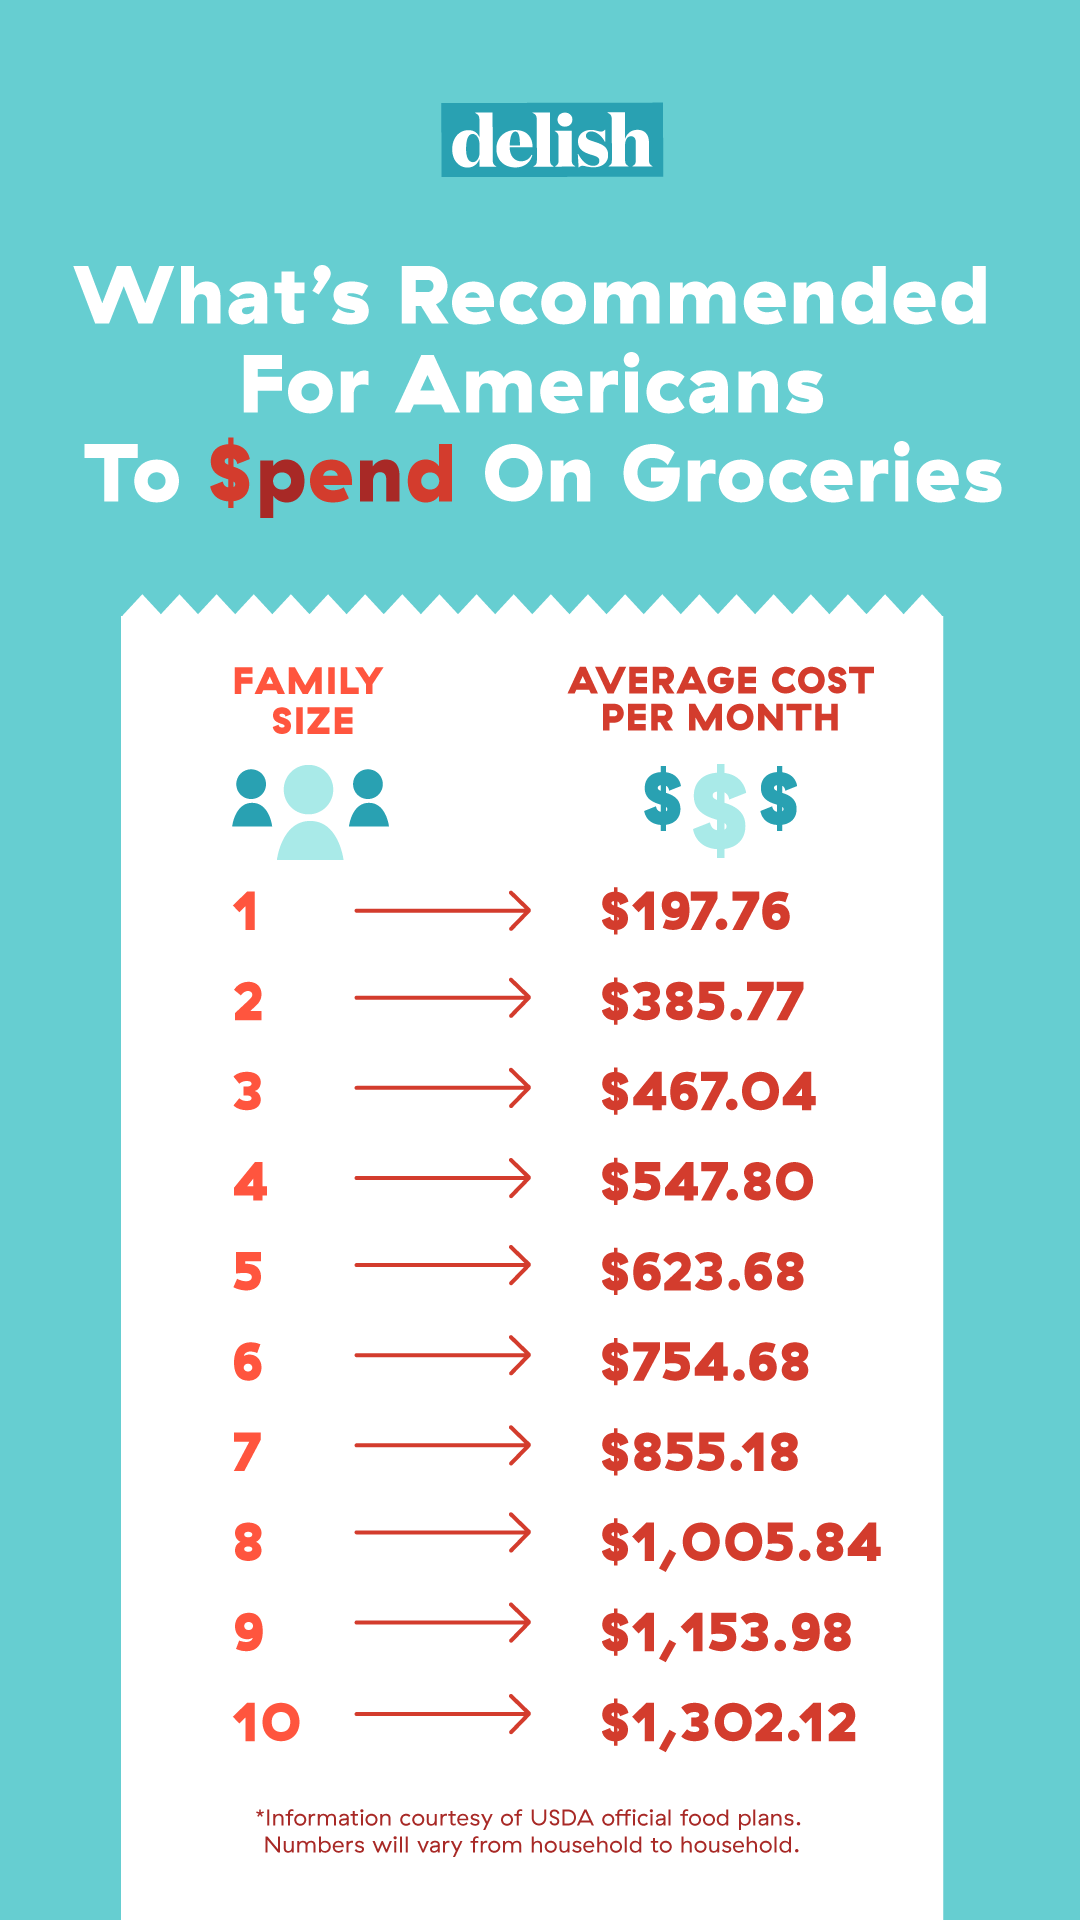 How Much Should I Spend On Groceries?